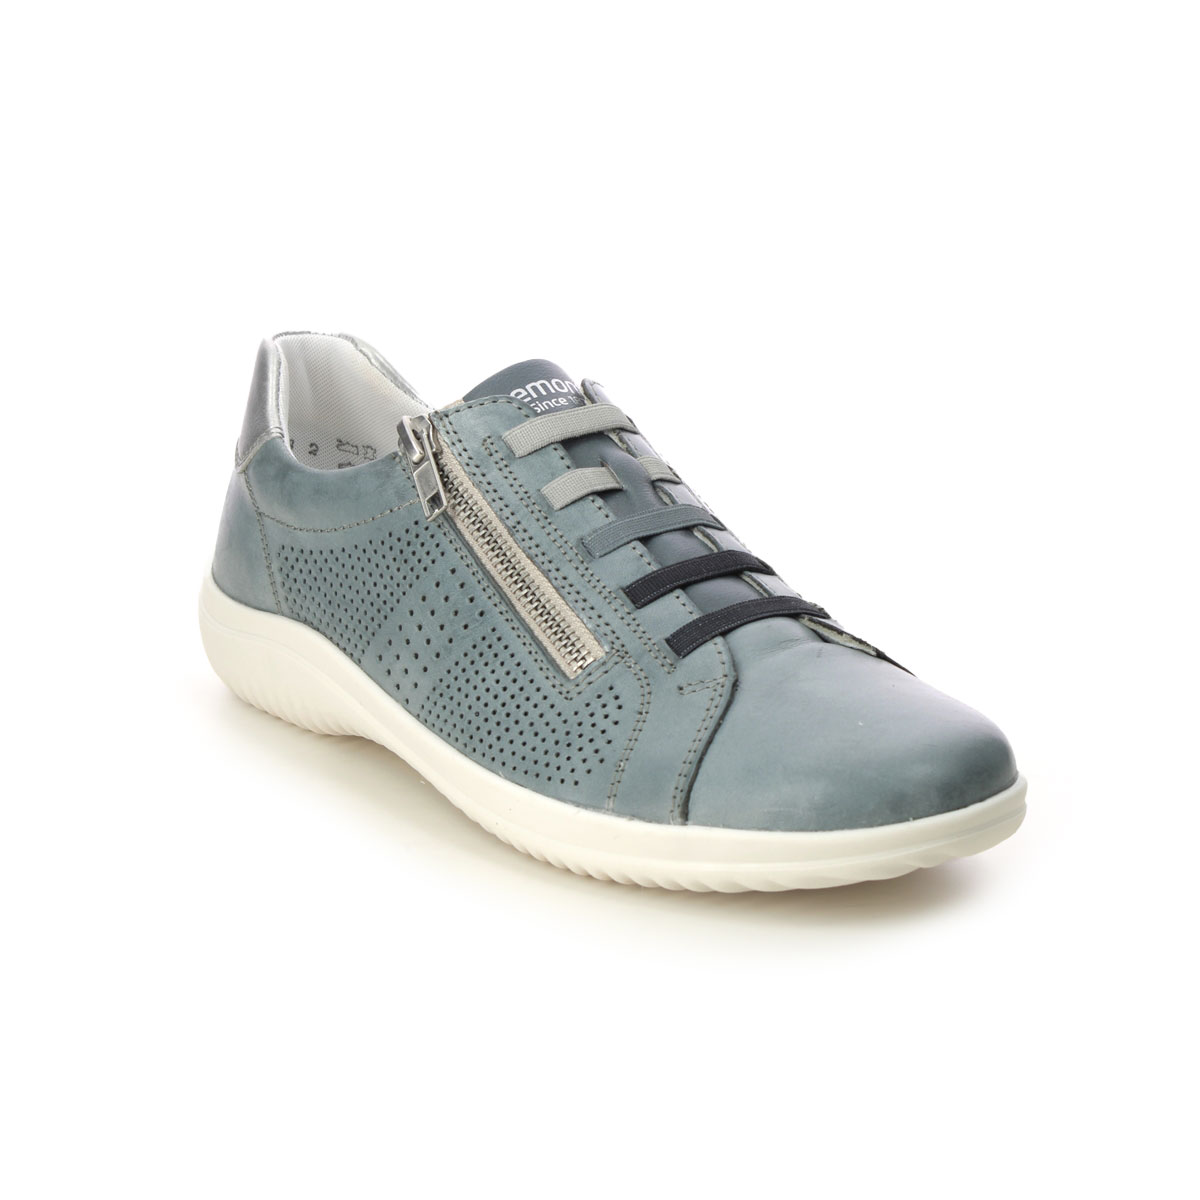 Remonte D1E02-14 Livonbungee Zip Denim leather Womens lacing shoes in a Plain Leather in Size 39